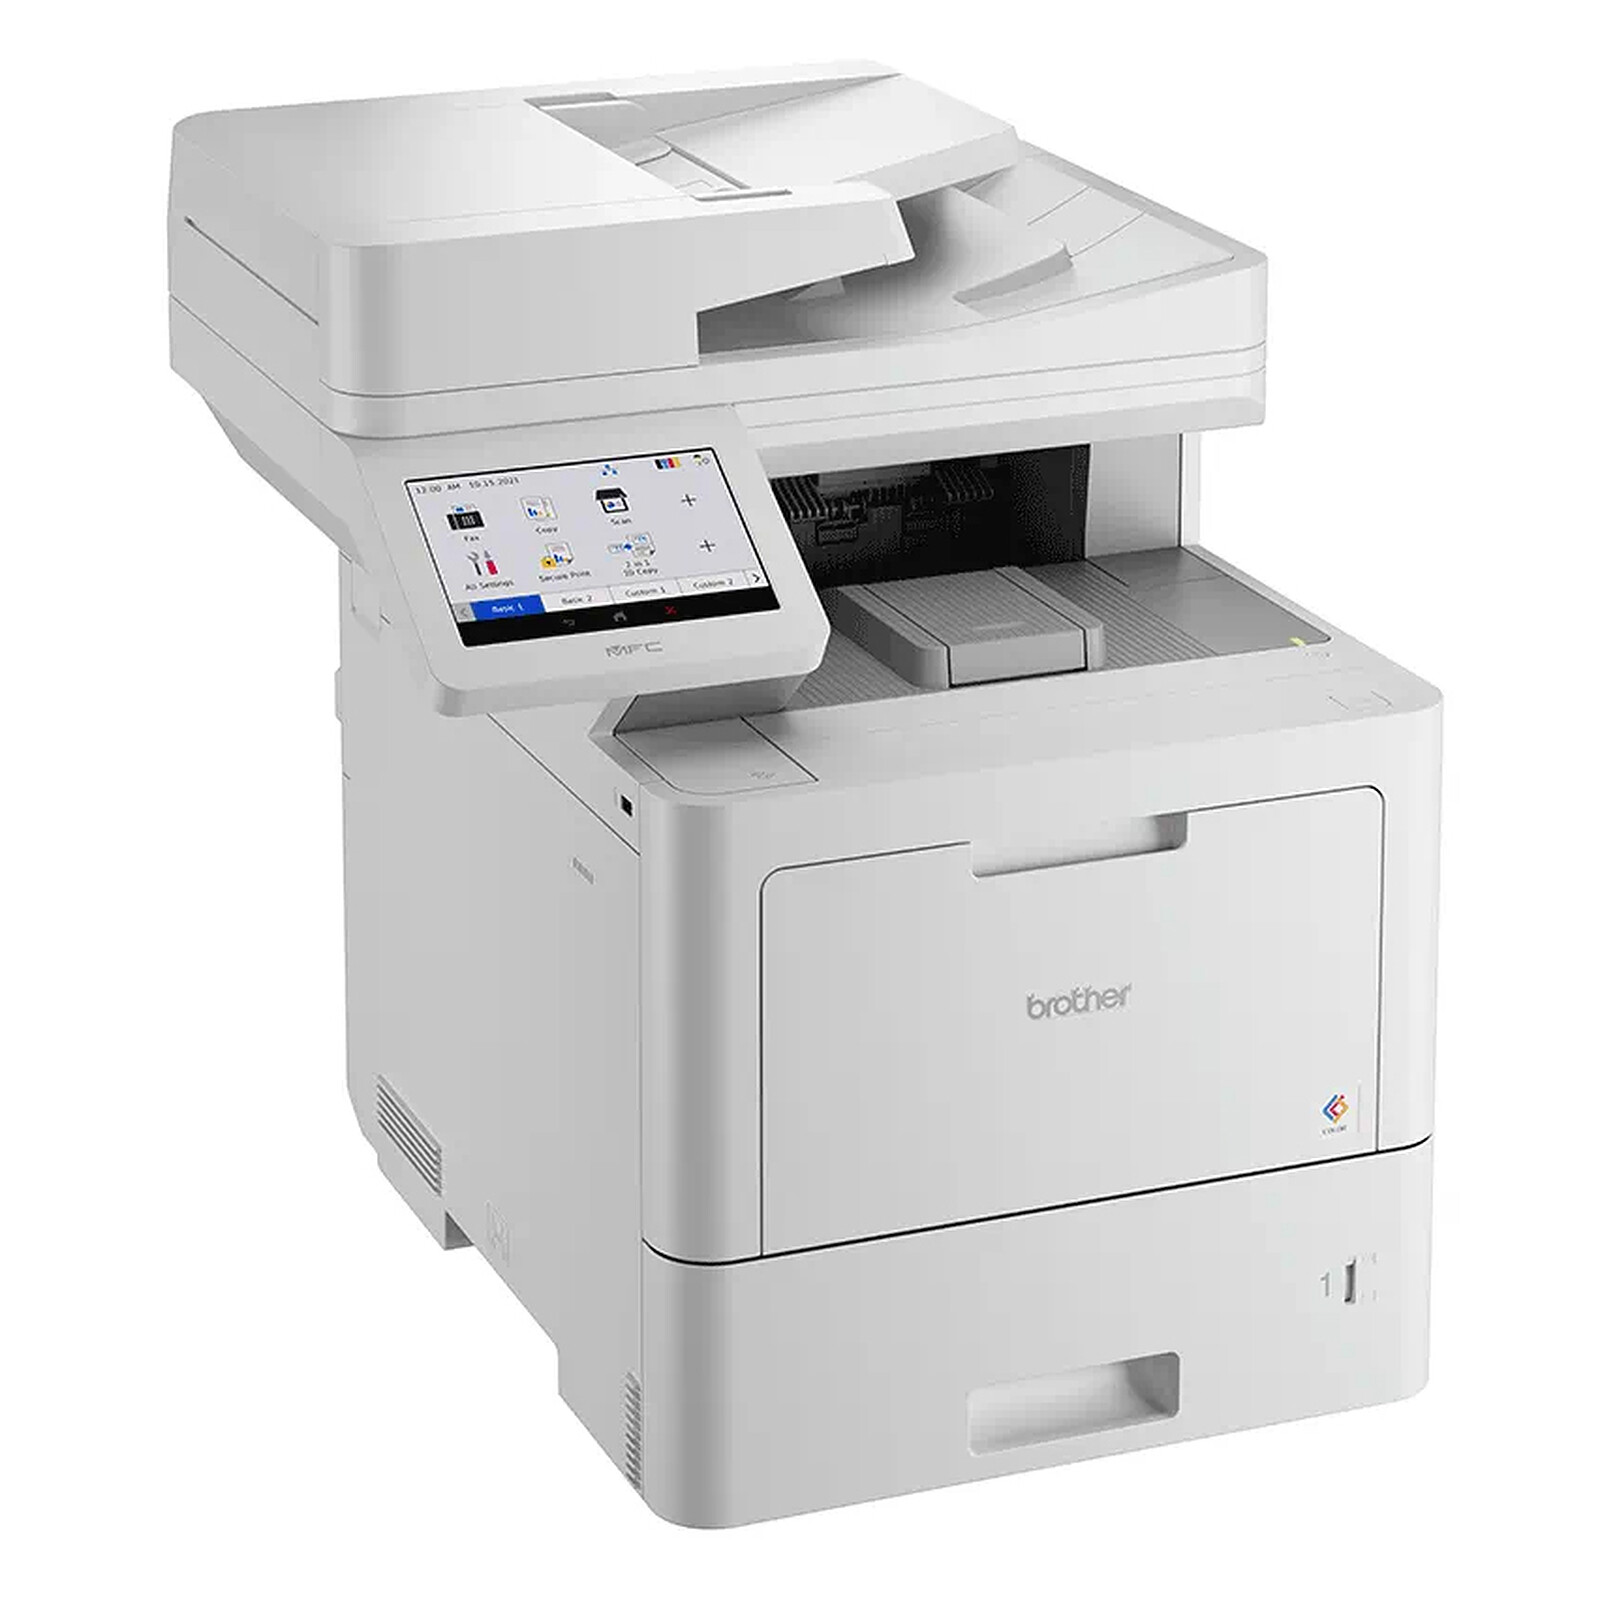 Brother MFC-L9670CDN - All-in-one printer - LDLC 3-year warranty